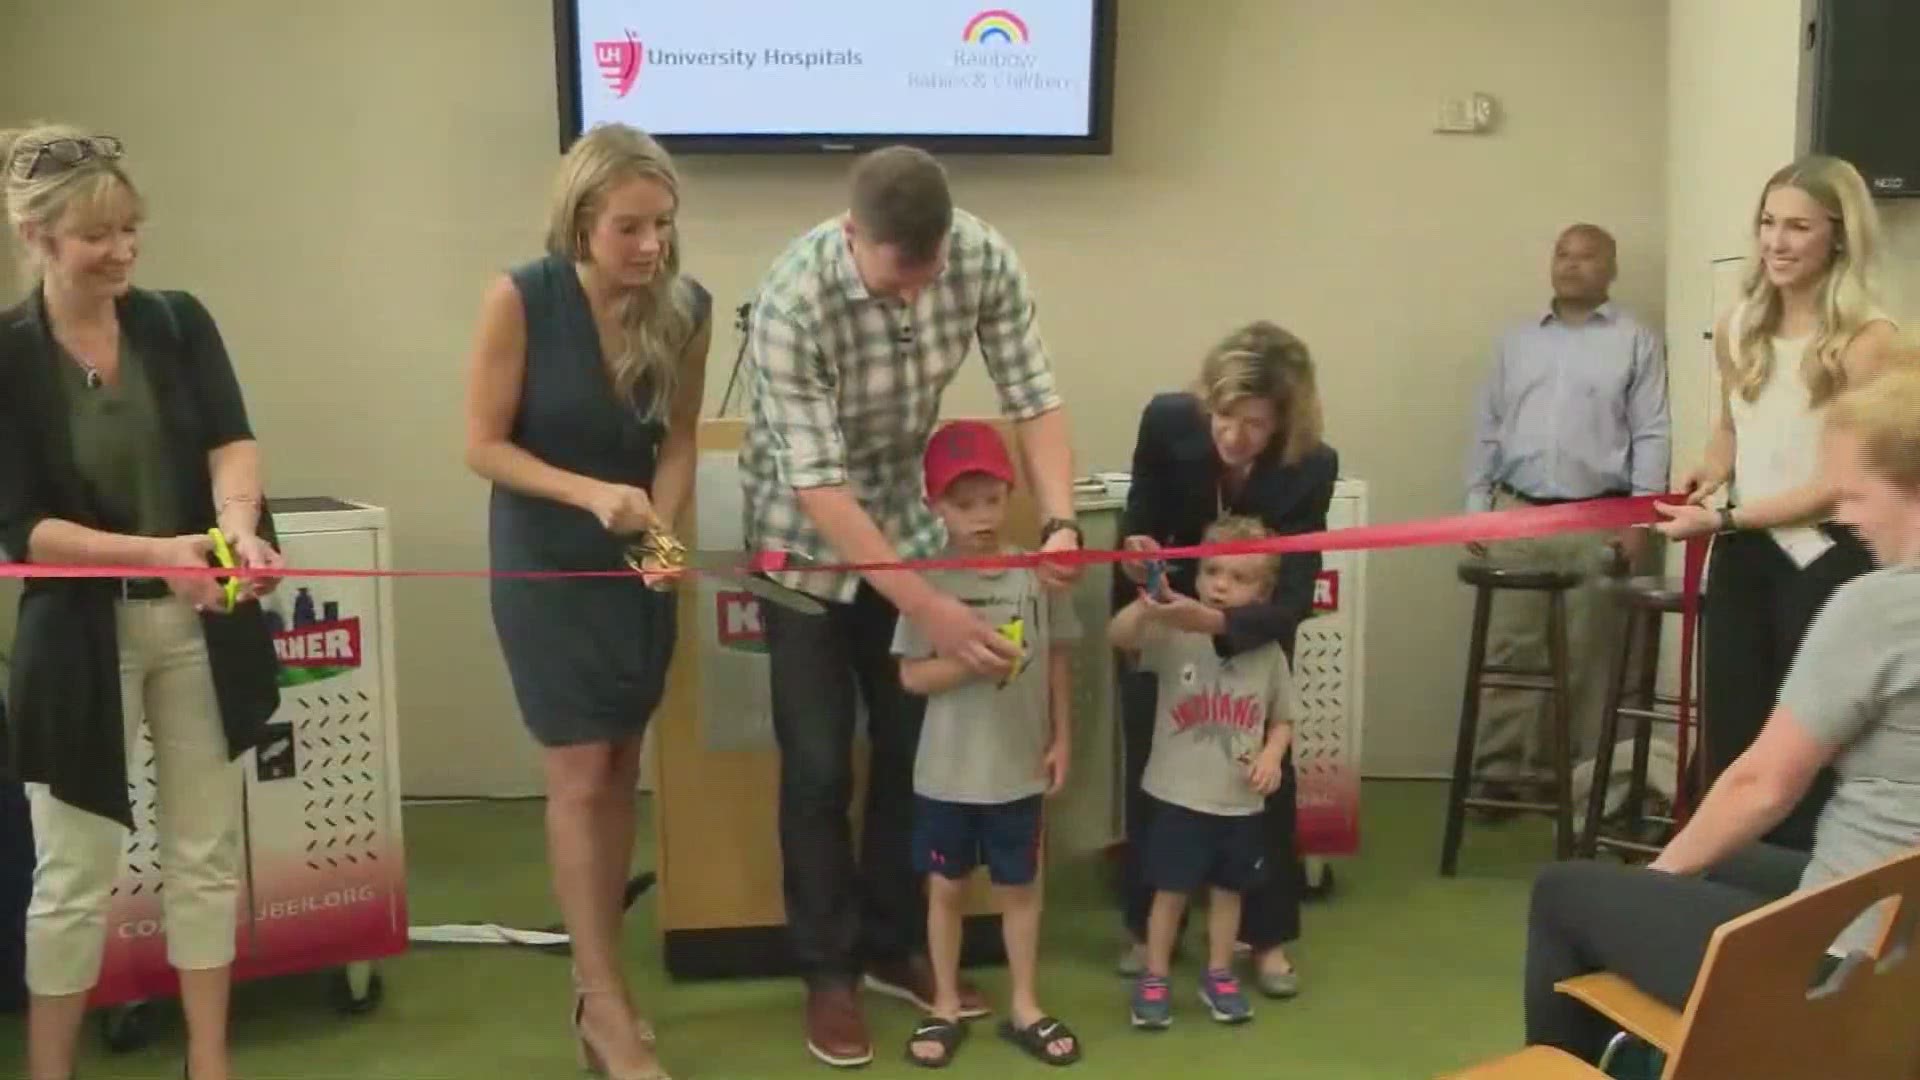 June 25, 2019: Welcome to Kluber’s Korner. The Cleveland Indians star pitcher unveiled the first 'Kluber’s Korner' at University Hospitals Rainbow Babies & Children’s Hospital on Tuesday morning. Kluber and his wife were there for the grand opening.